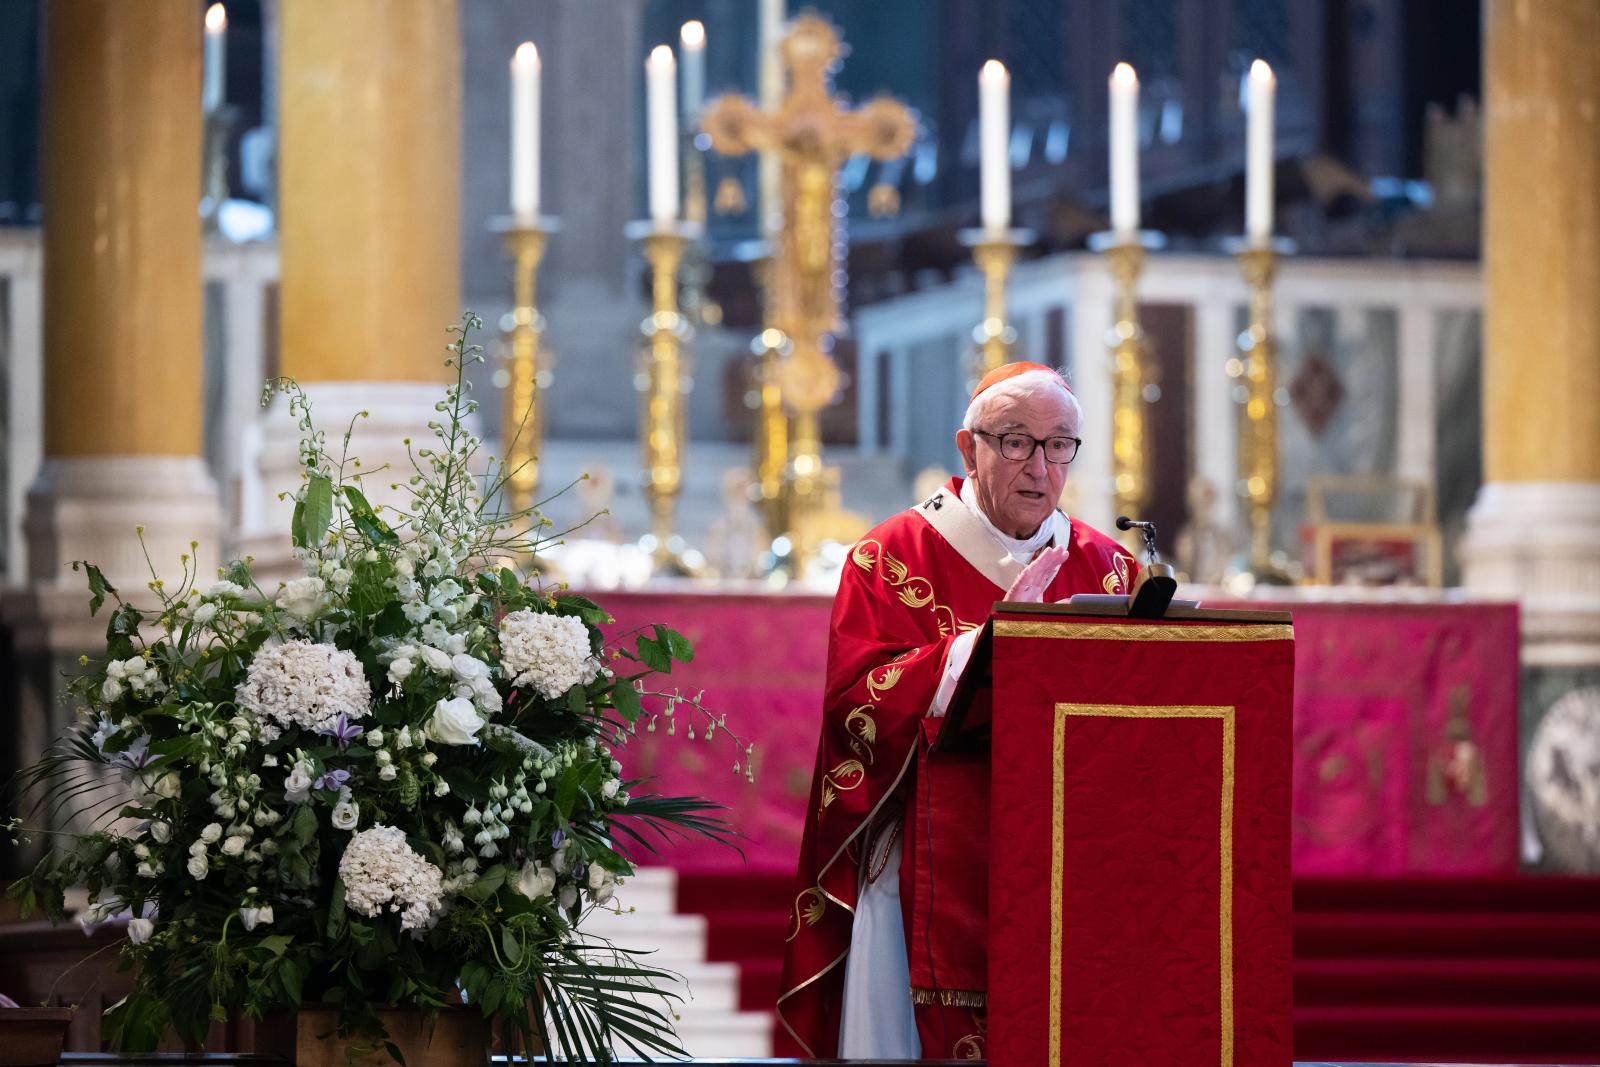 Cardinal's Homily for the Synodal Pathway Mass